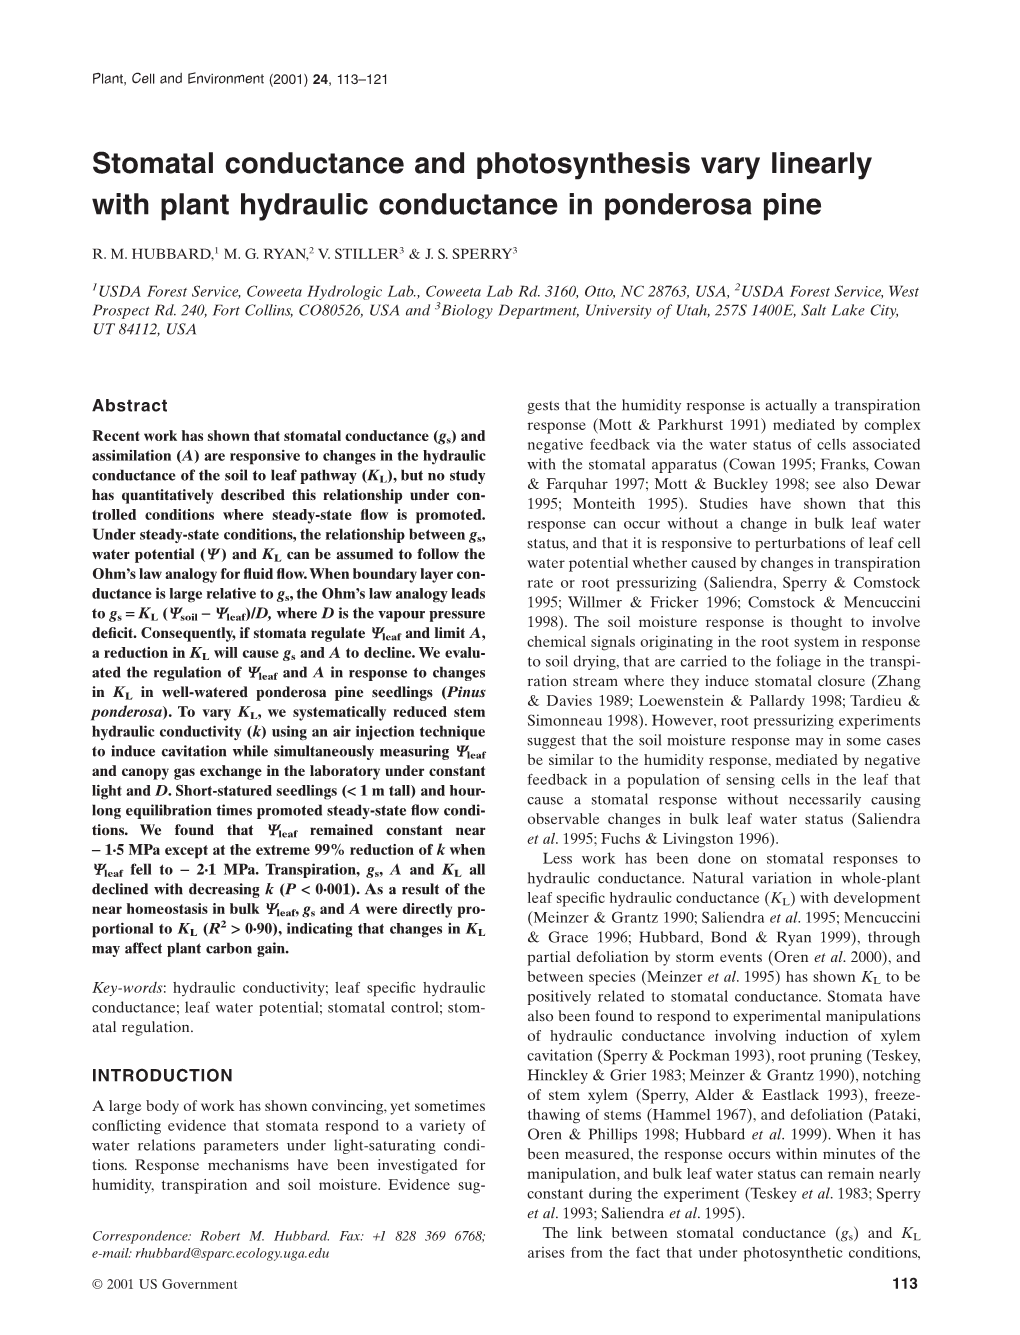 Stomatal Conductance and Photosynthesis Vary Linearly with Plant Hydraulic Conductance in Ponderosa Pine